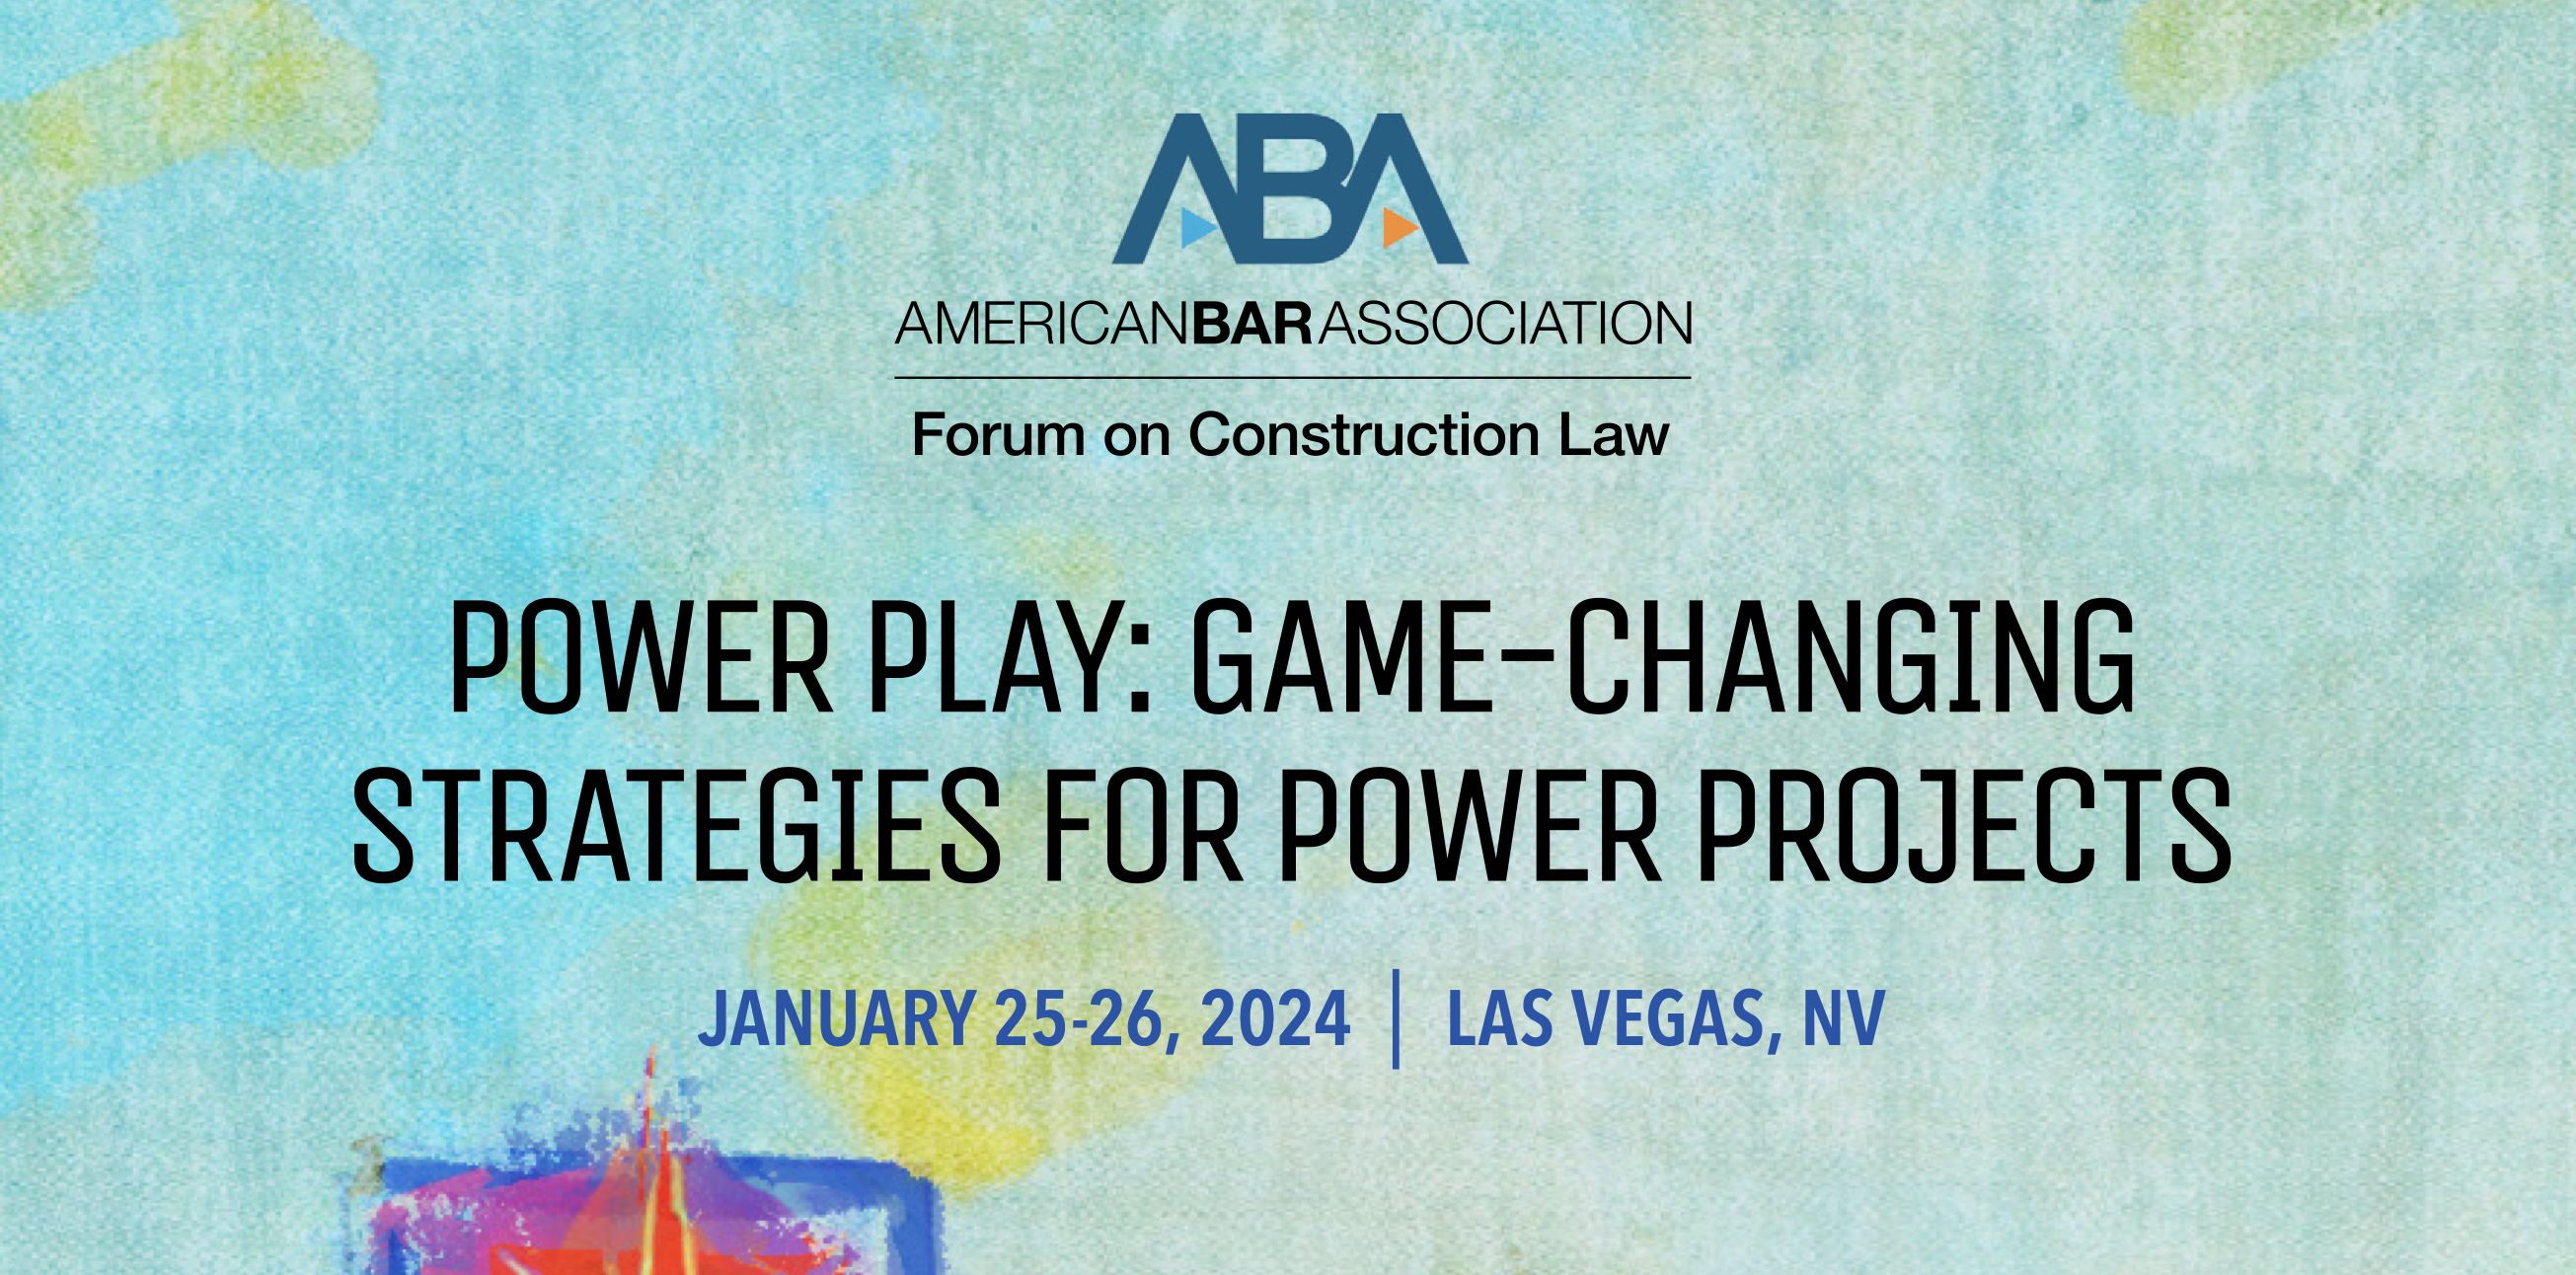 ABA Forum on Construction Law 2024 Mid-Winter Meeting Graphic 